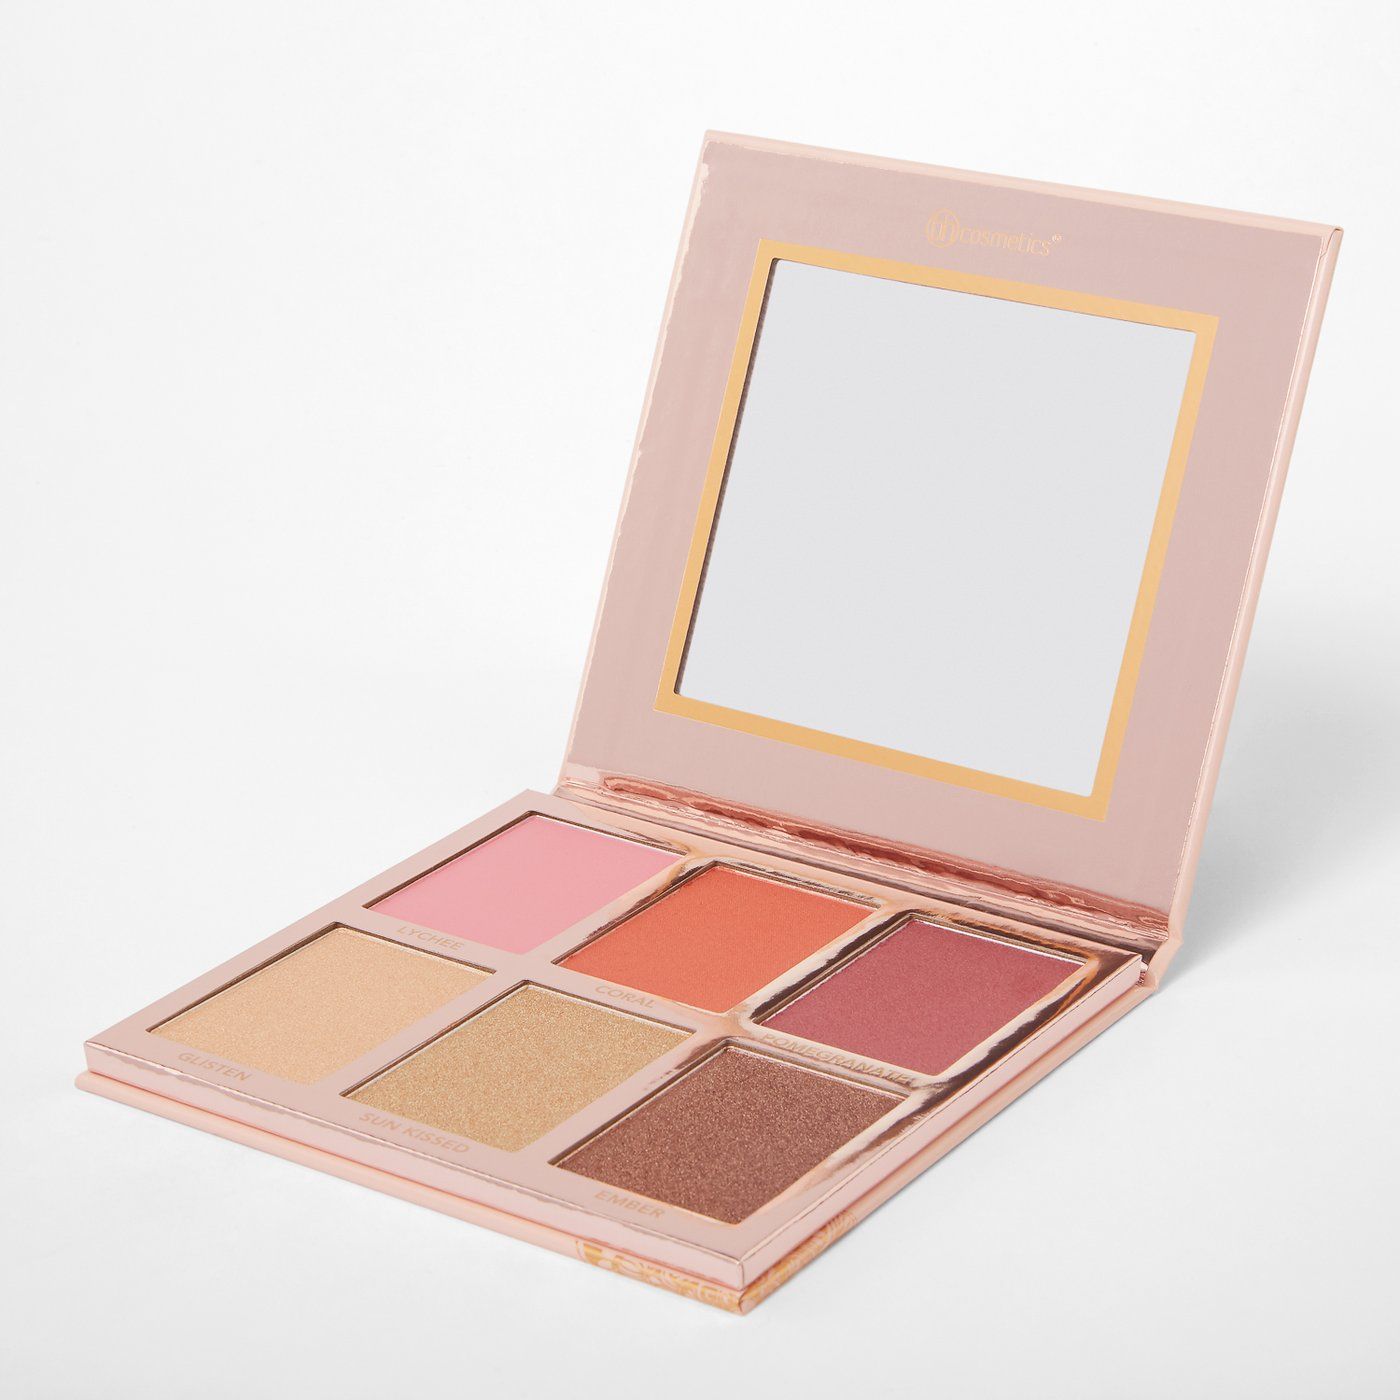 Blushing-In-Bali-6-Color-Blush-_-Highlighter-Palette-angled-web_1400x1400